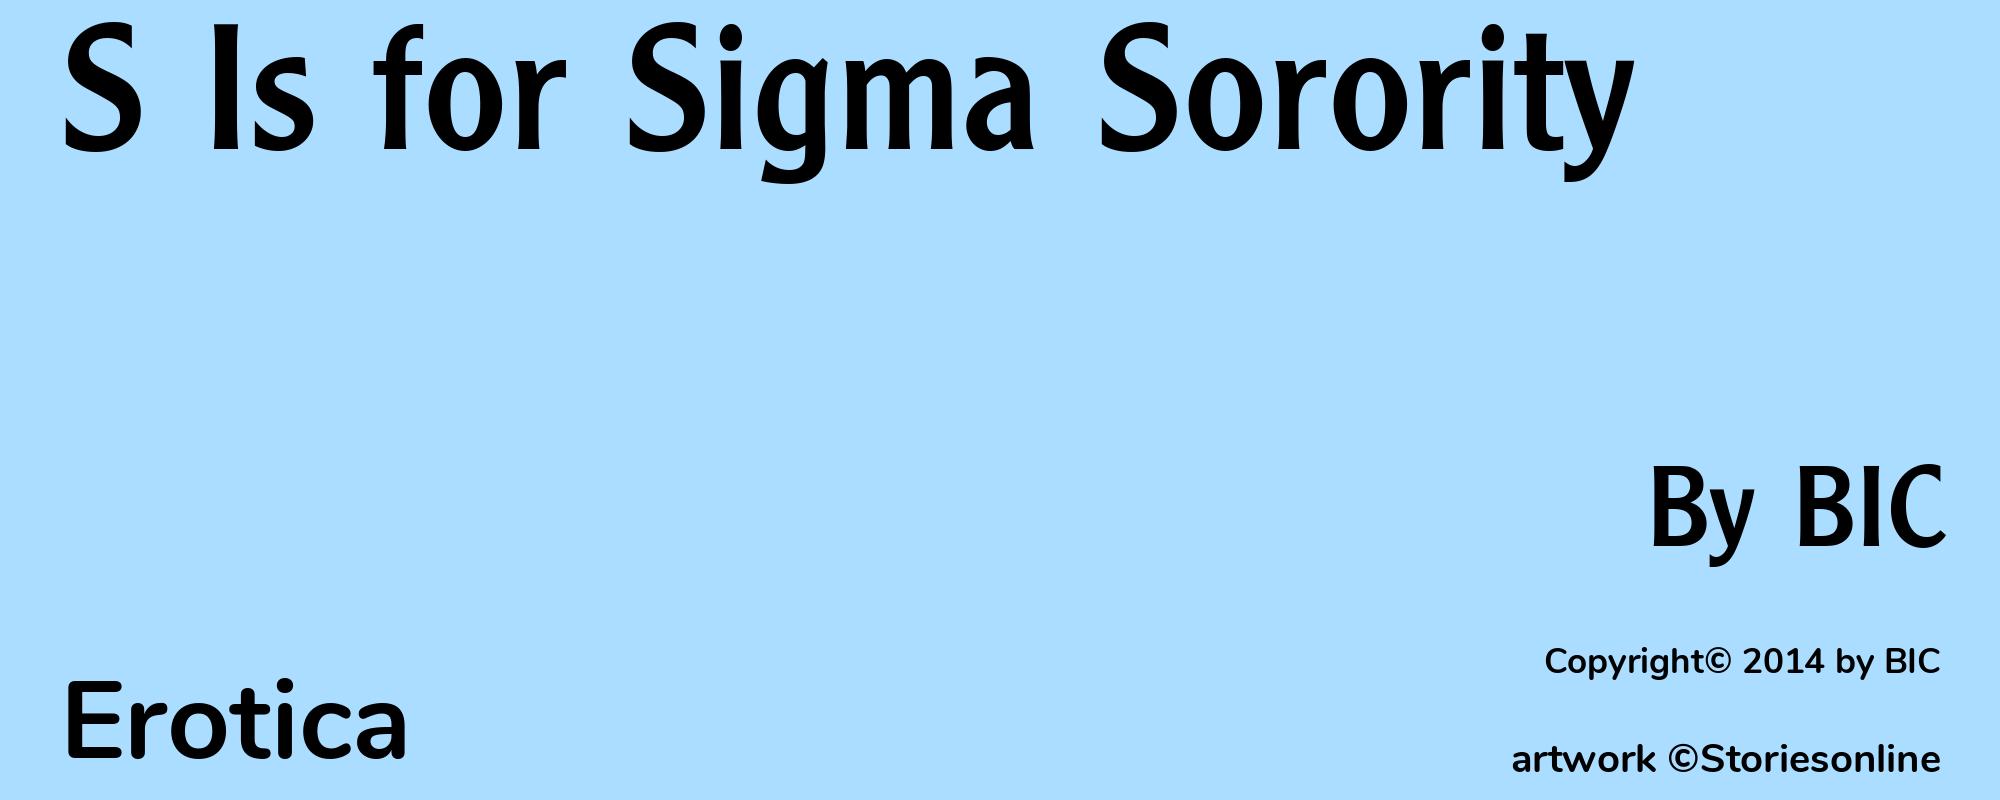 S Is for Sigma Sorority - Cover